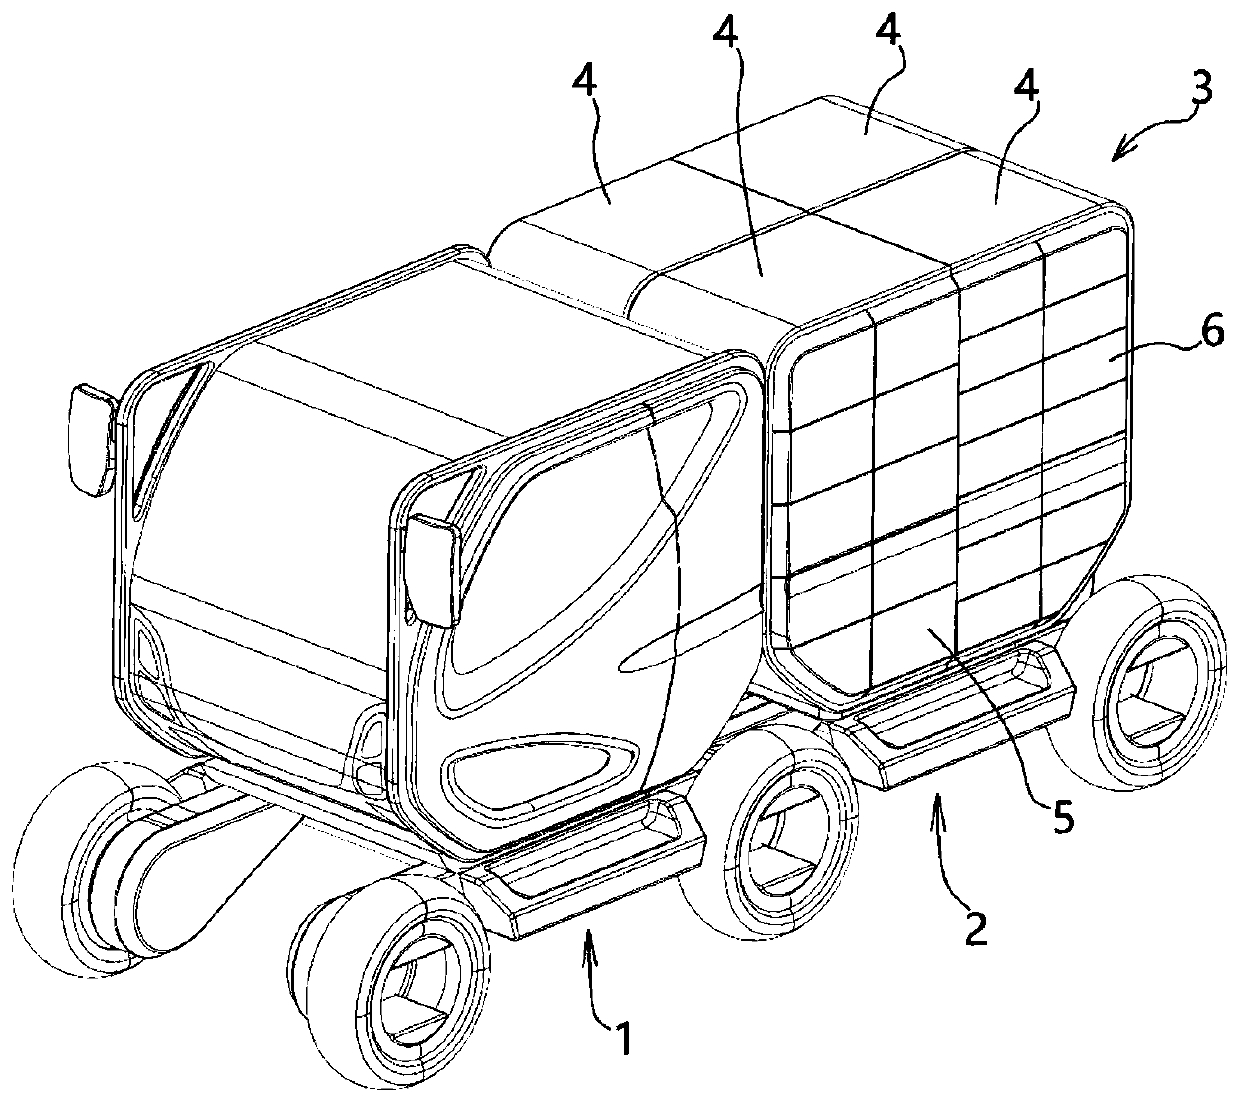 Express delivery vehicle and delivery method